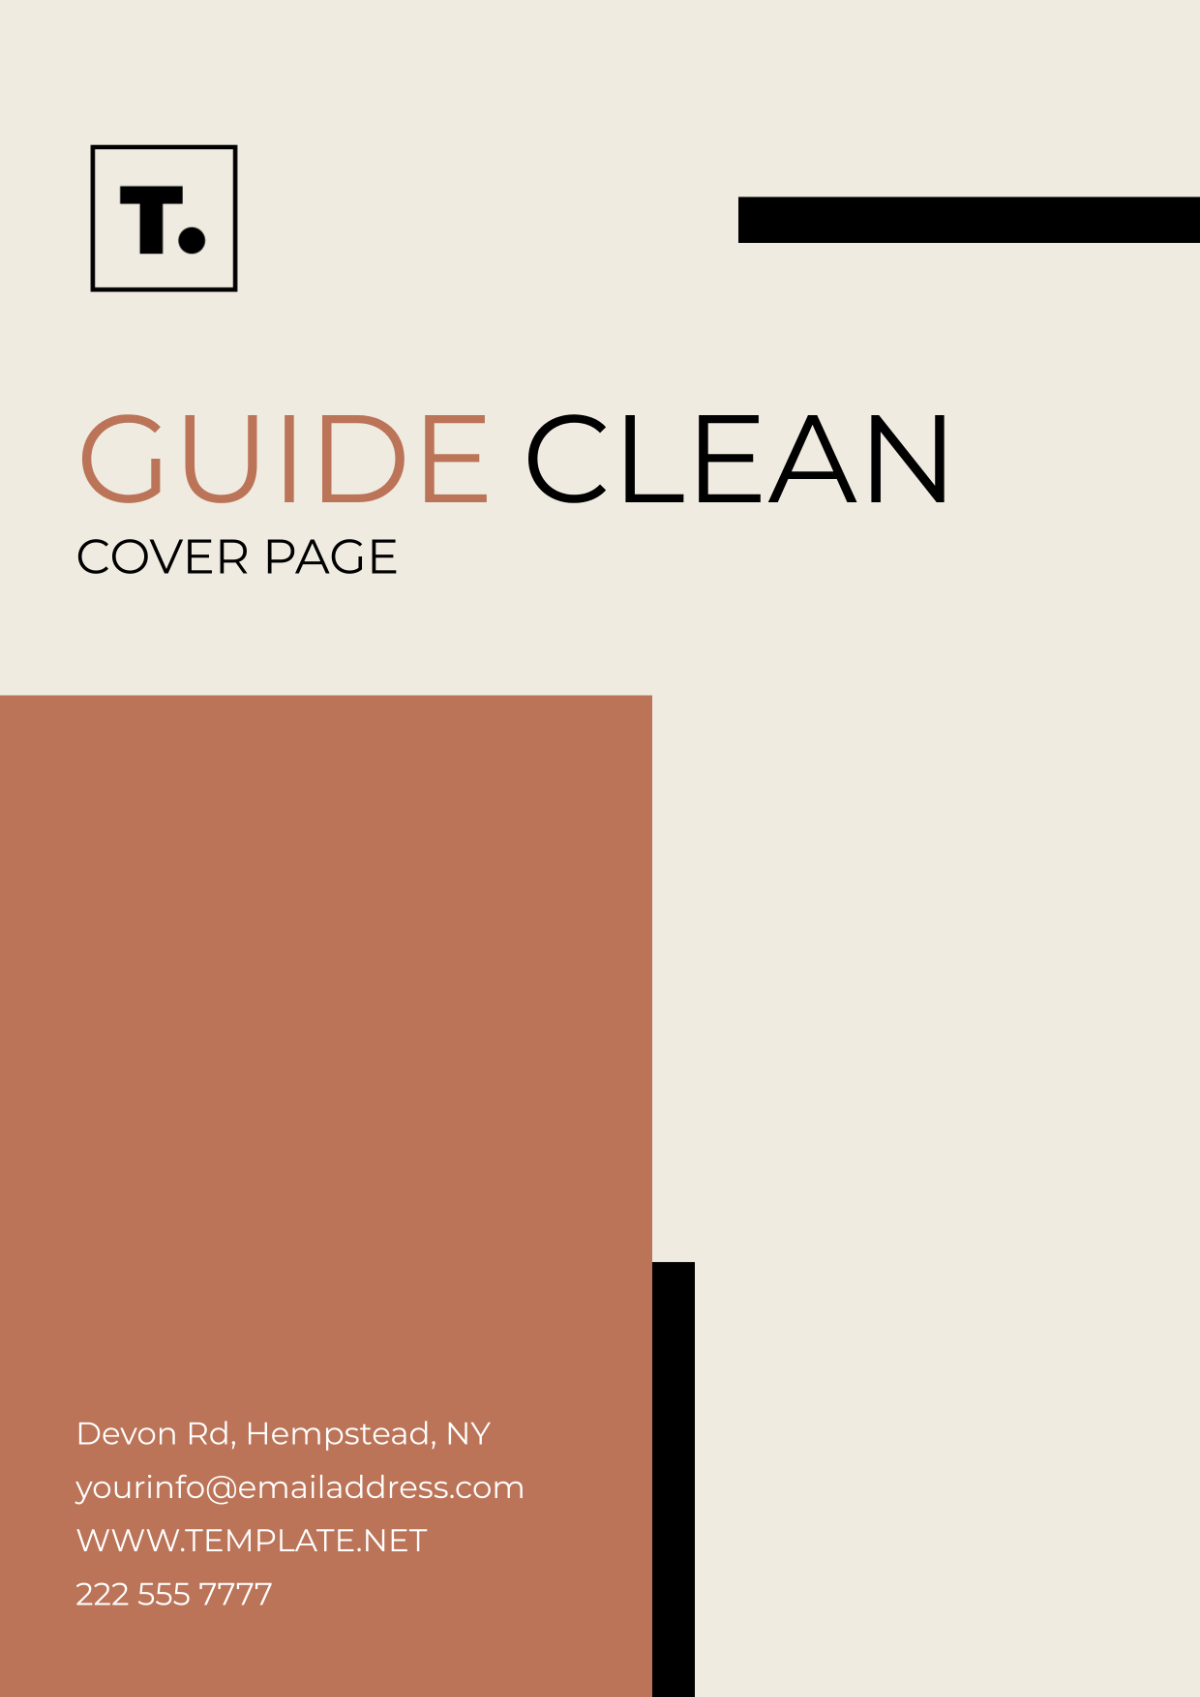 Guide Clean Cover Page